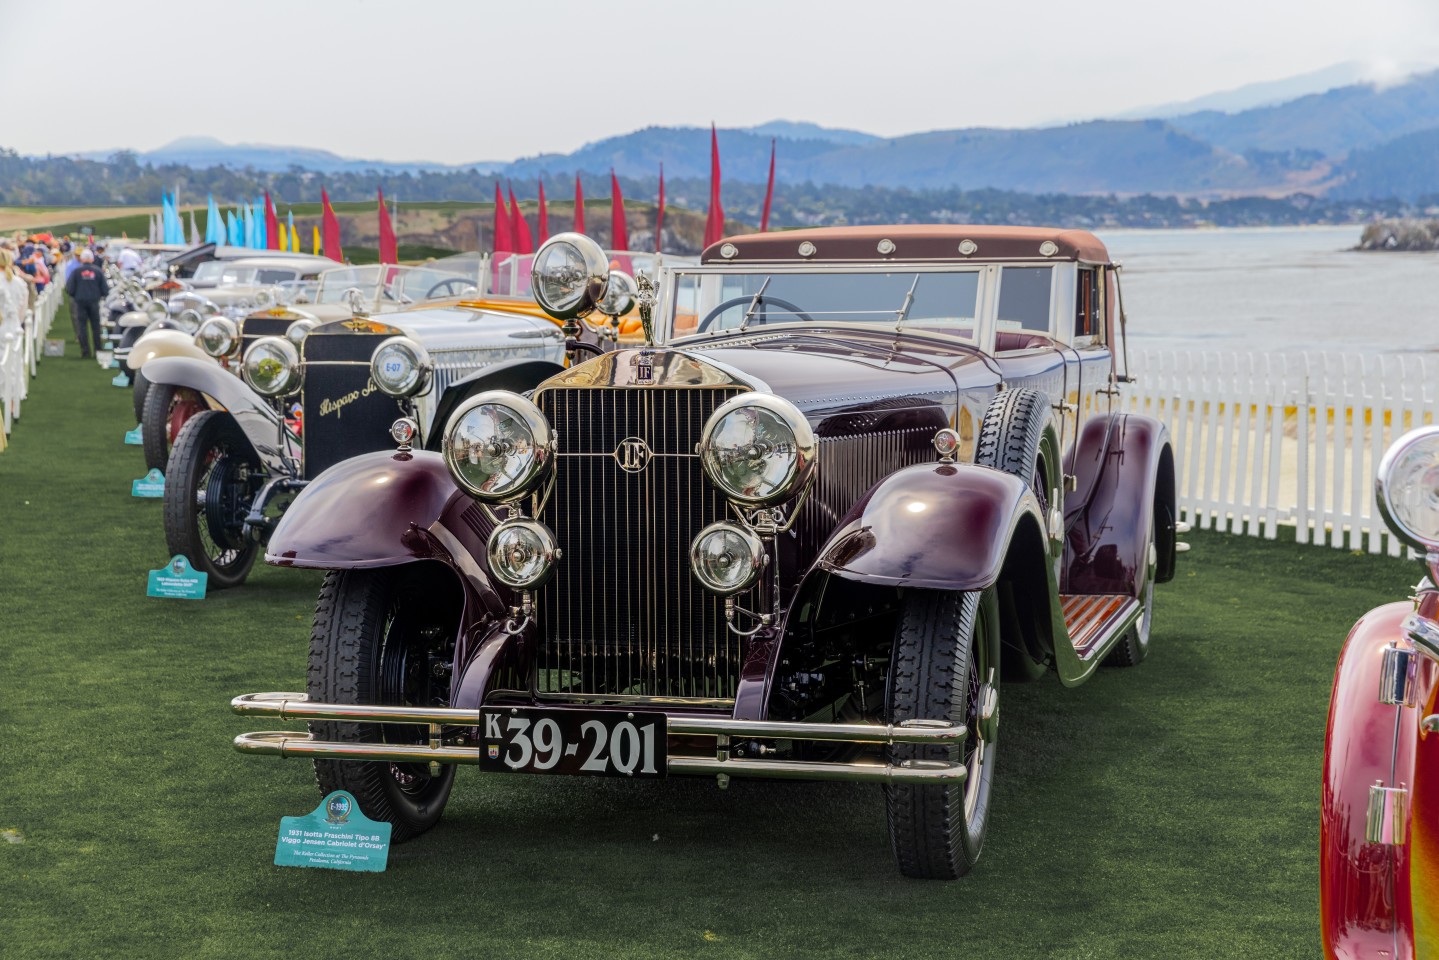 This 1931 Isotta Fraschini Tipo 8B Jensen Cabriolet d'Orsay is one of seven former "Best of Show" winners at Pebble Beach that are now owned by Arturo Keller and reside within The Keller Collection at The Pyramids, Petaluma, California.